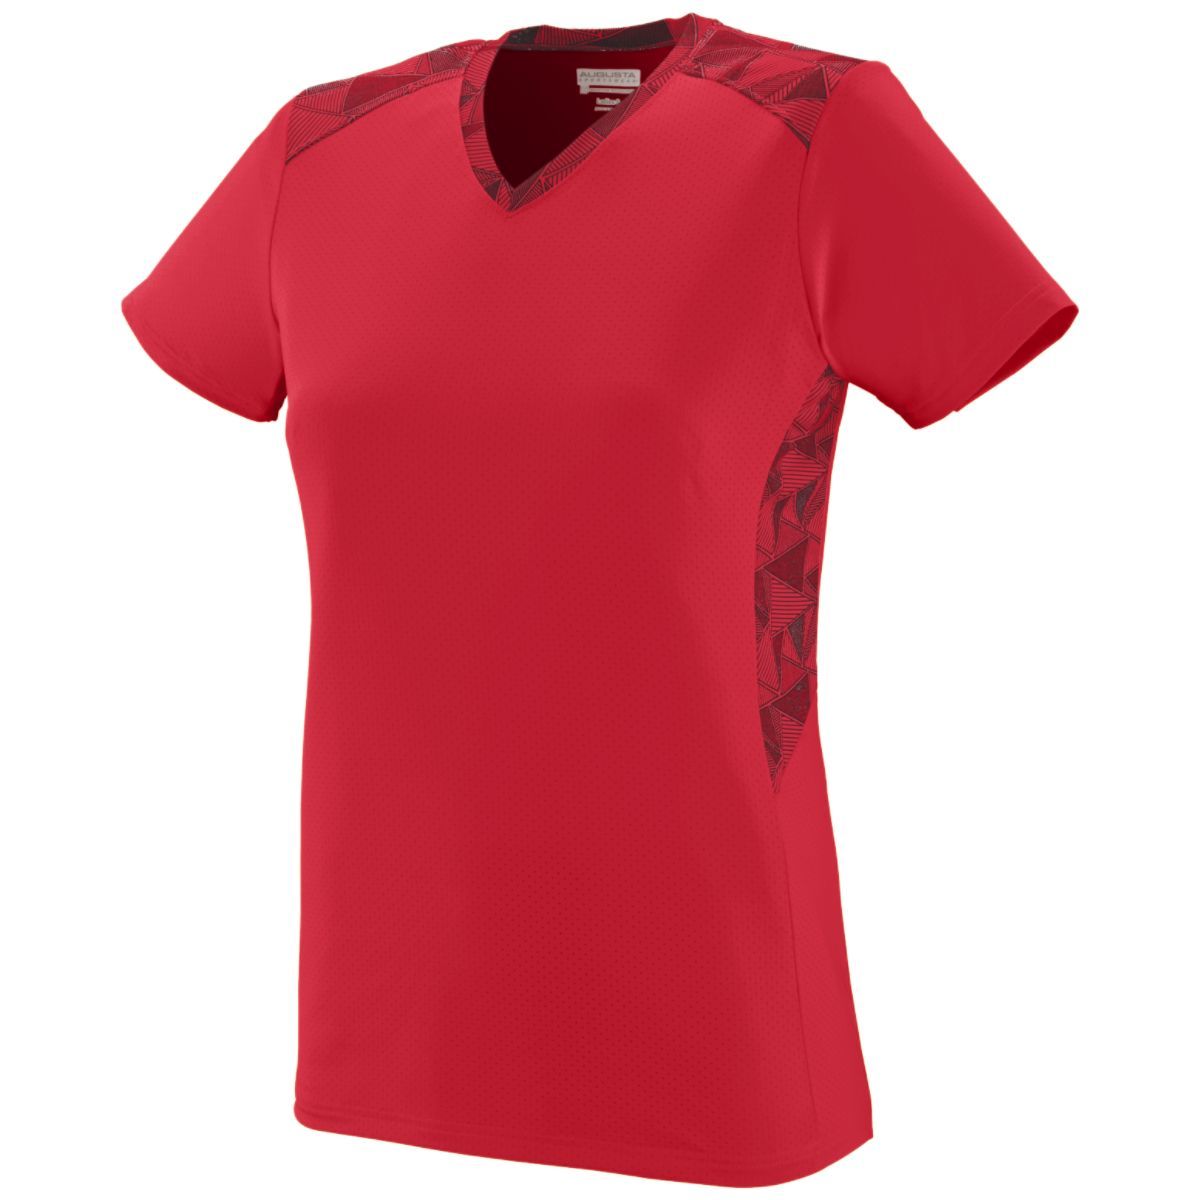 Augusta Sportswear Ladies Vigorous Jersey in Red/Red/Black Print  -Part of the Ladies, Ladies-Jersey, Augusta-Products, Softball, Shirts product lines at KanaleyCreations.com